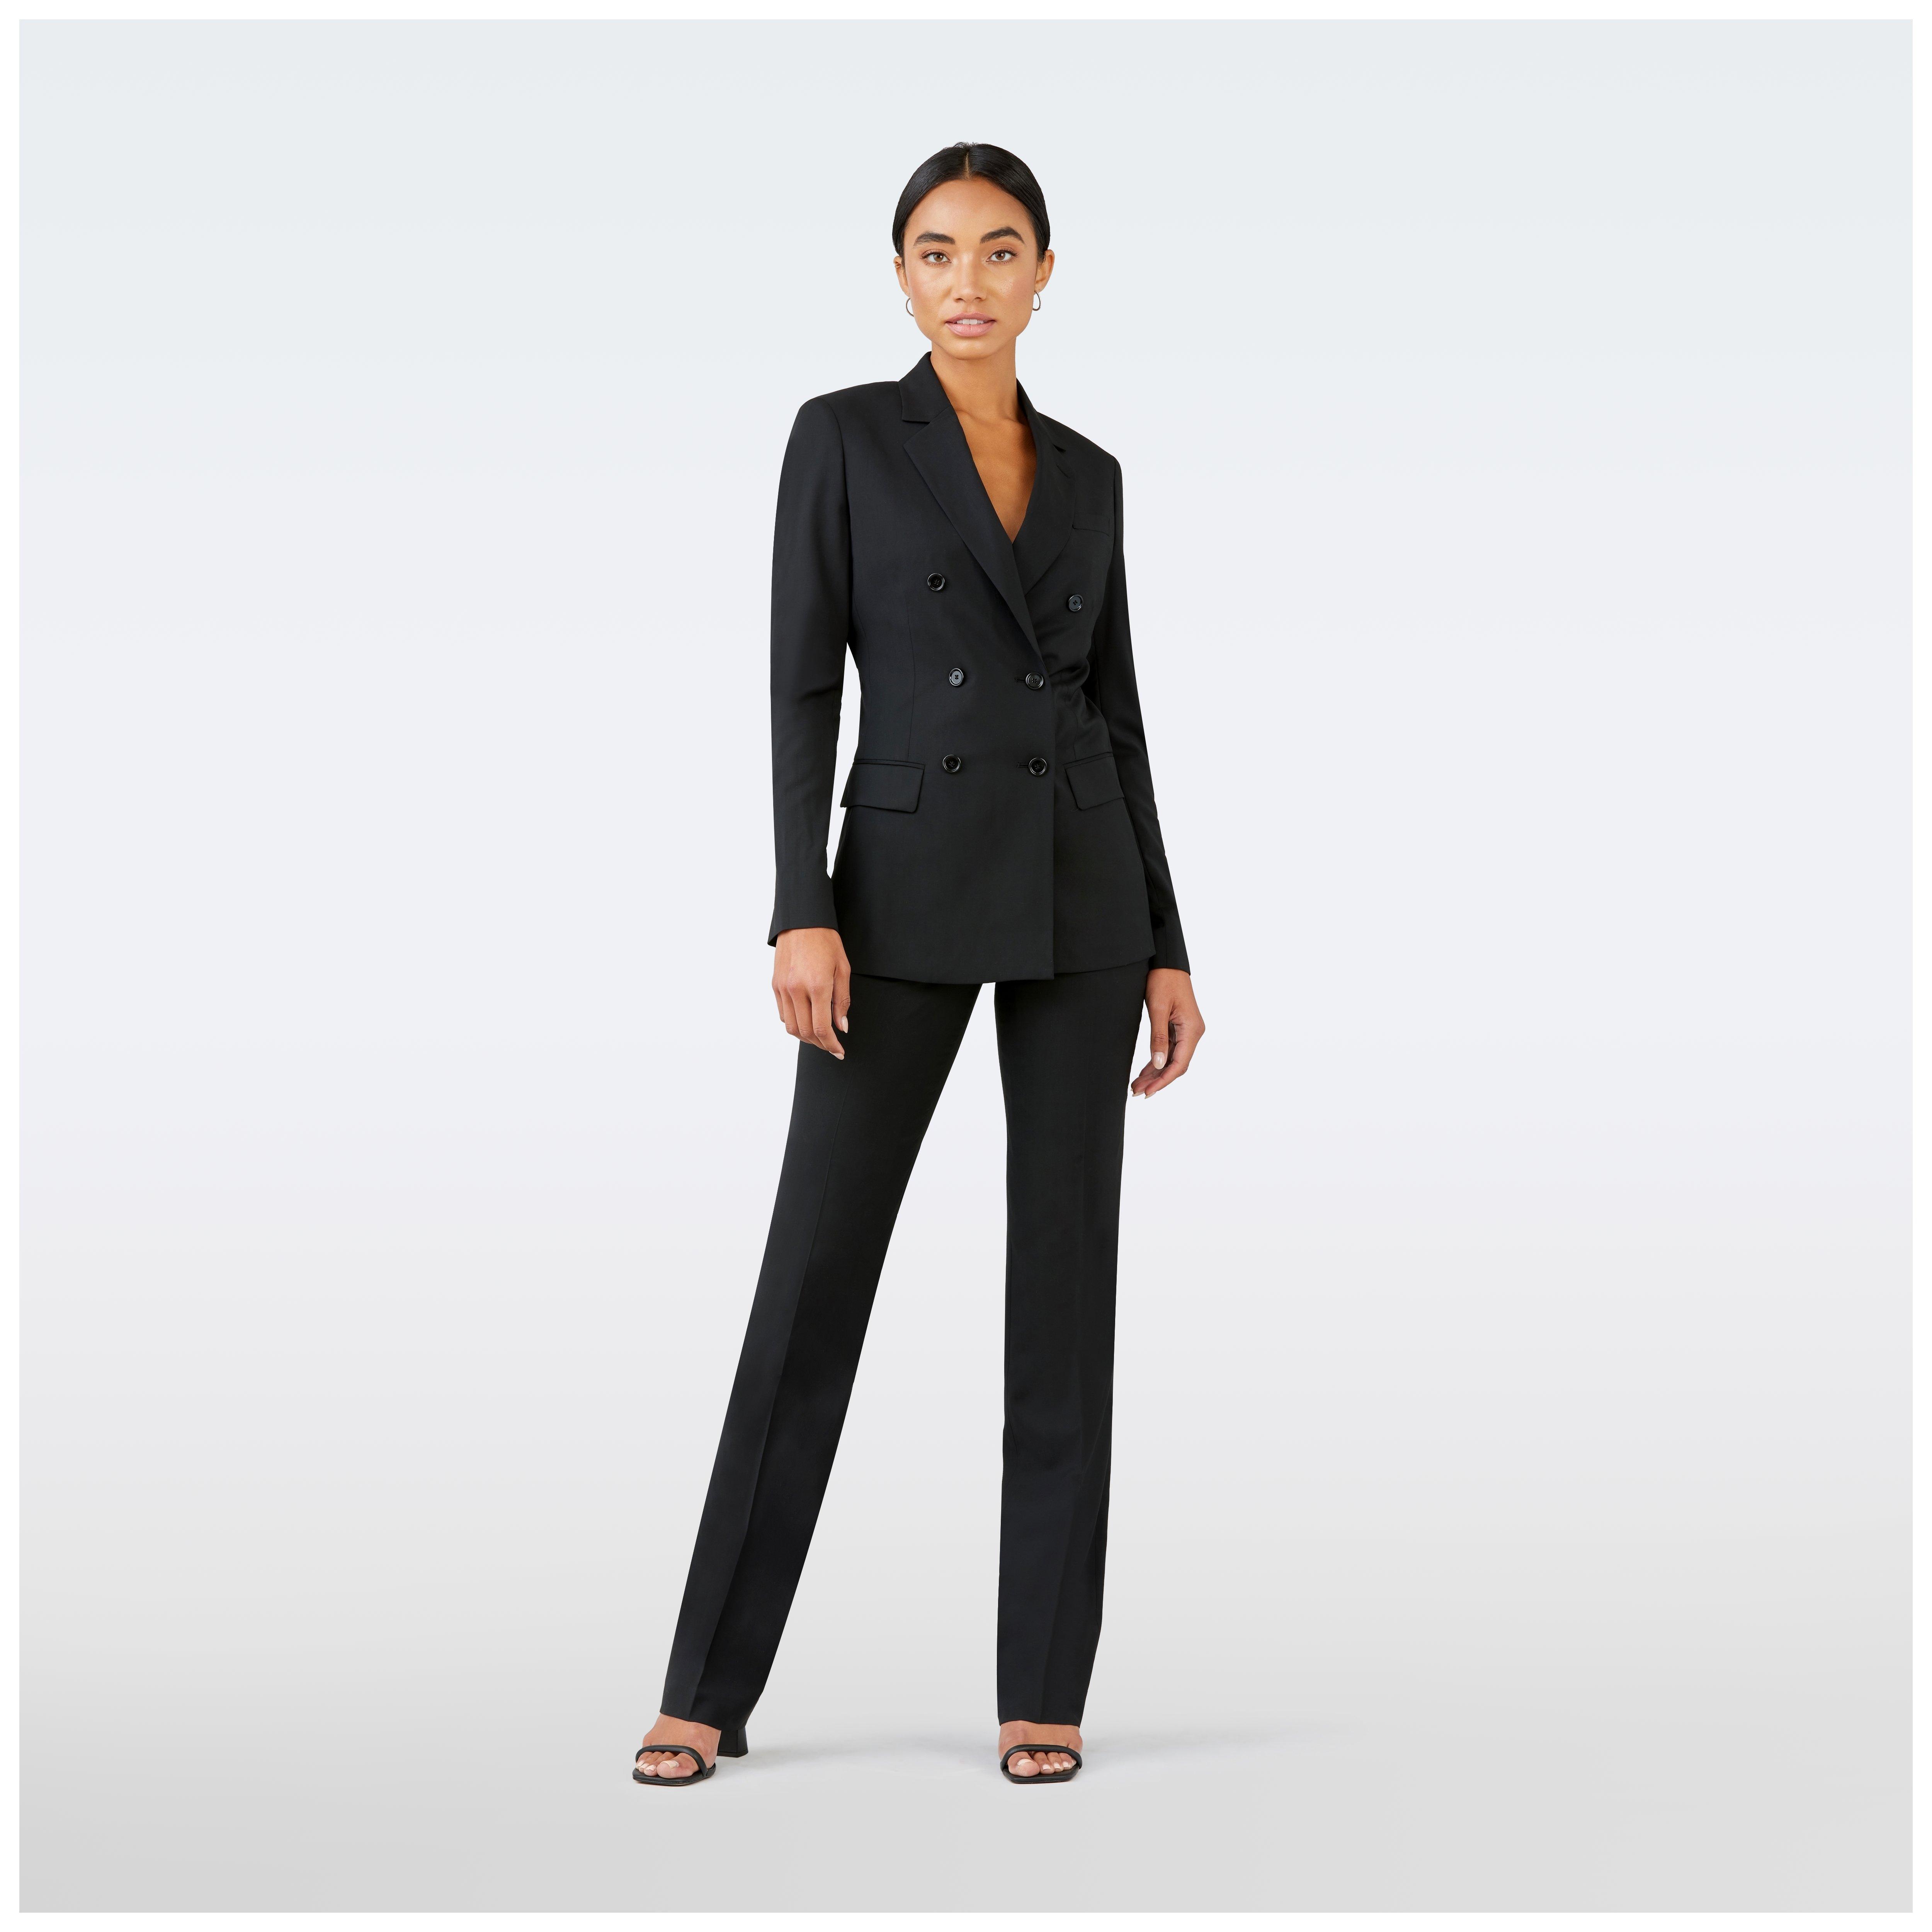 Custom Suits Made For You - Milano Black Suit Women | INDOCHINO